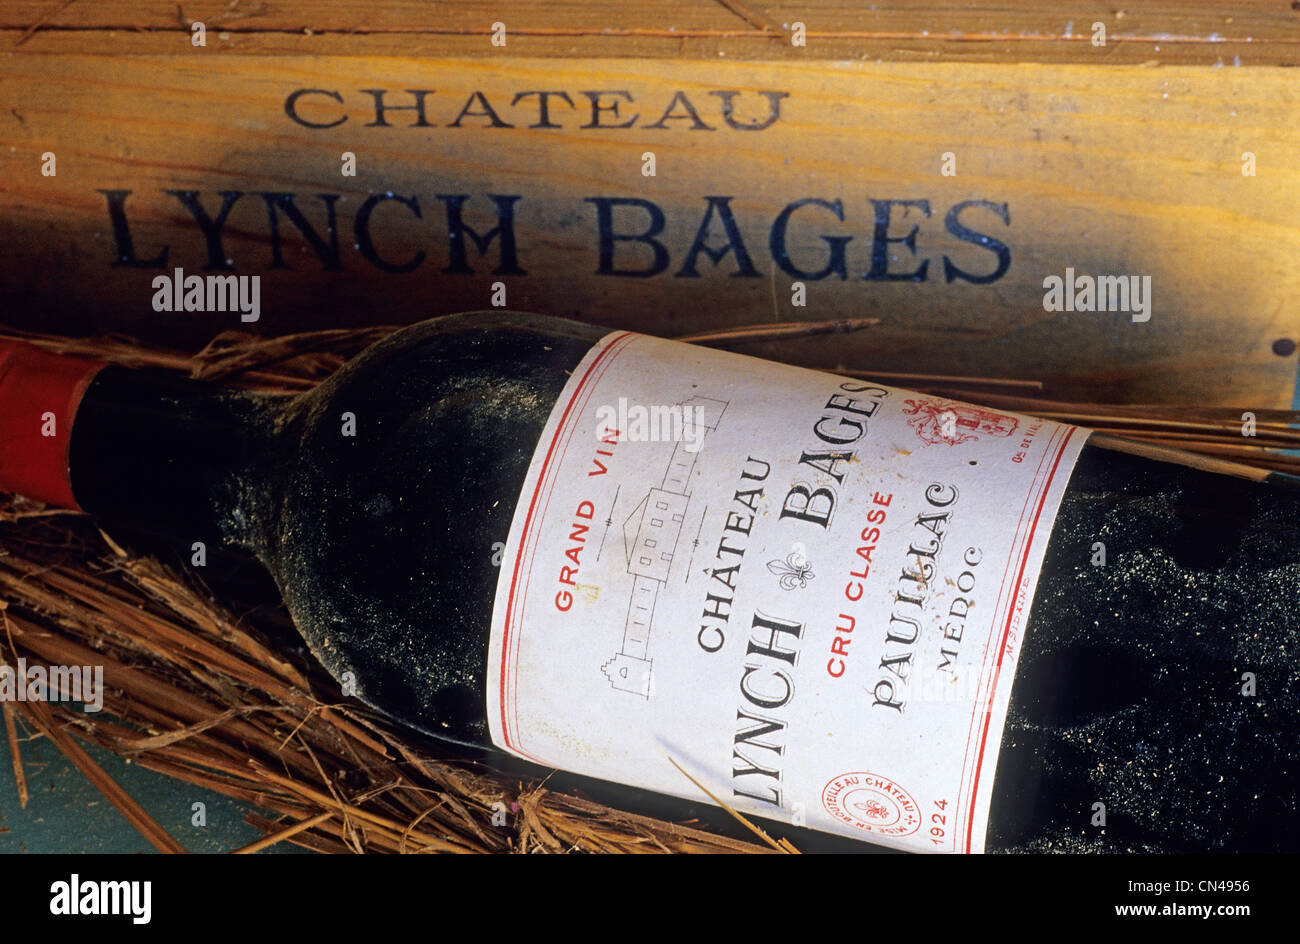 France, Gironde, Pauillac, Chateau Lynch Bages, vintage bottle and his box  Stock Photo - Alamy